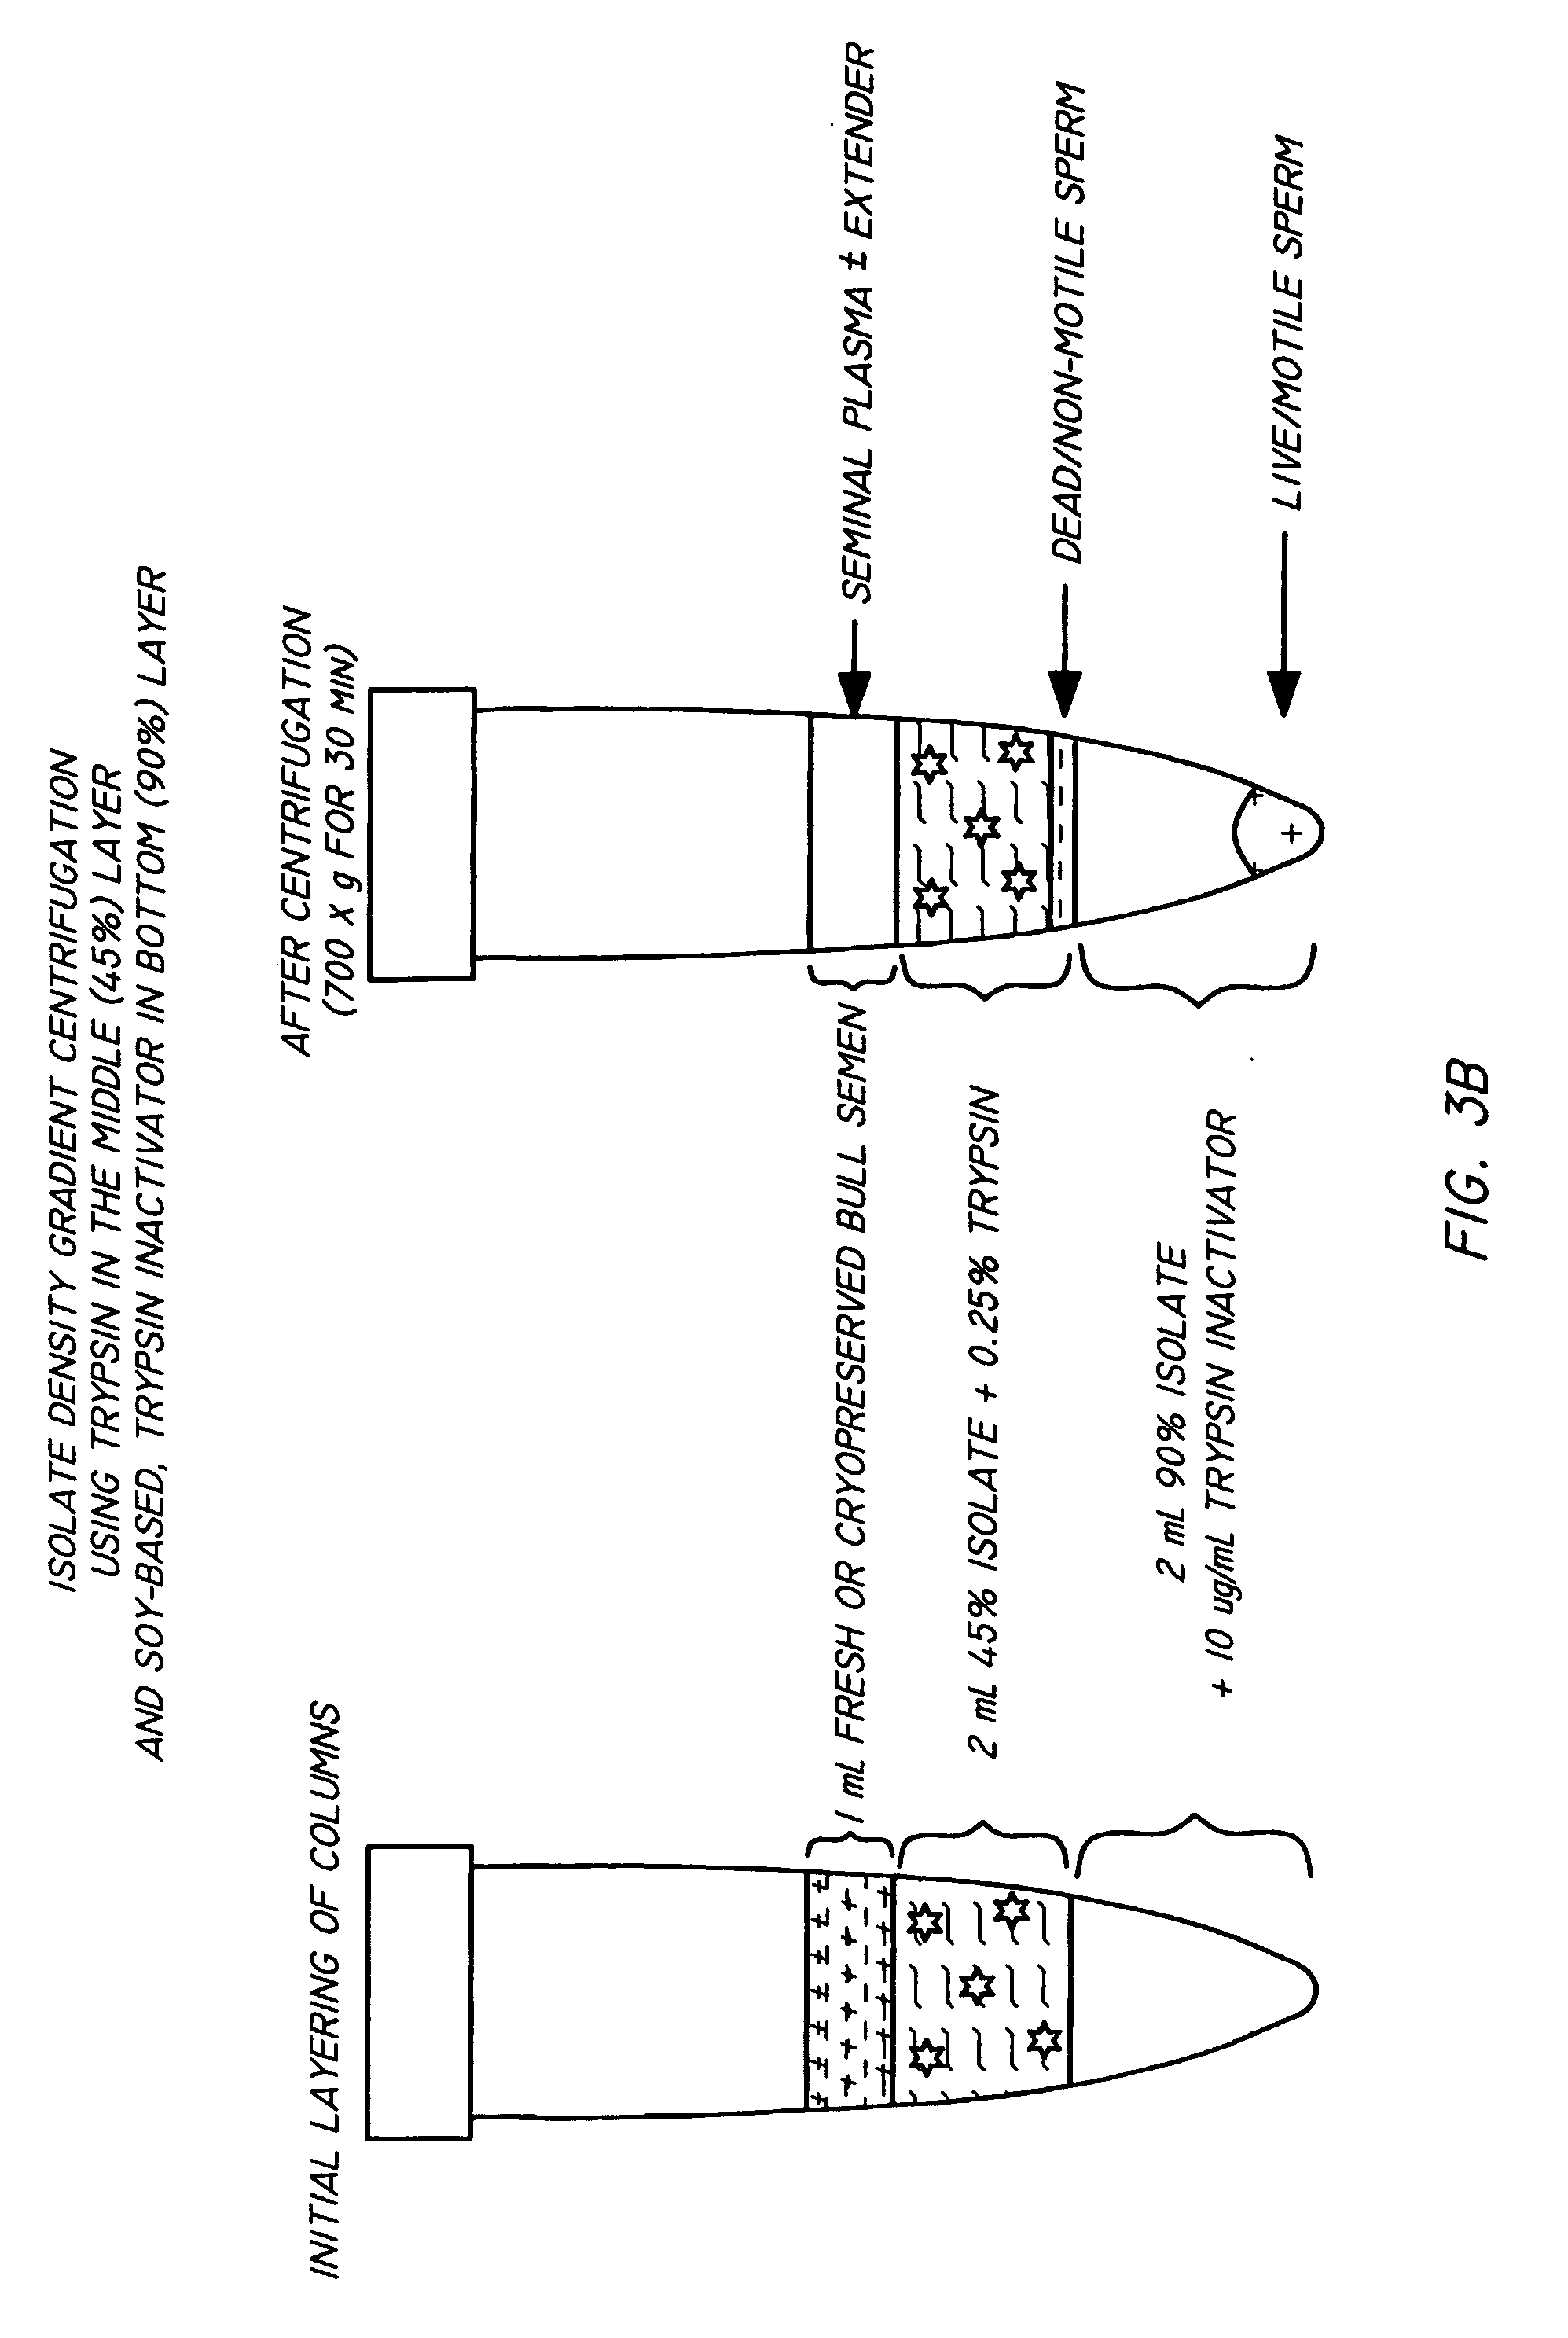 Method and apparatus for reducing pathogens in a biological sample